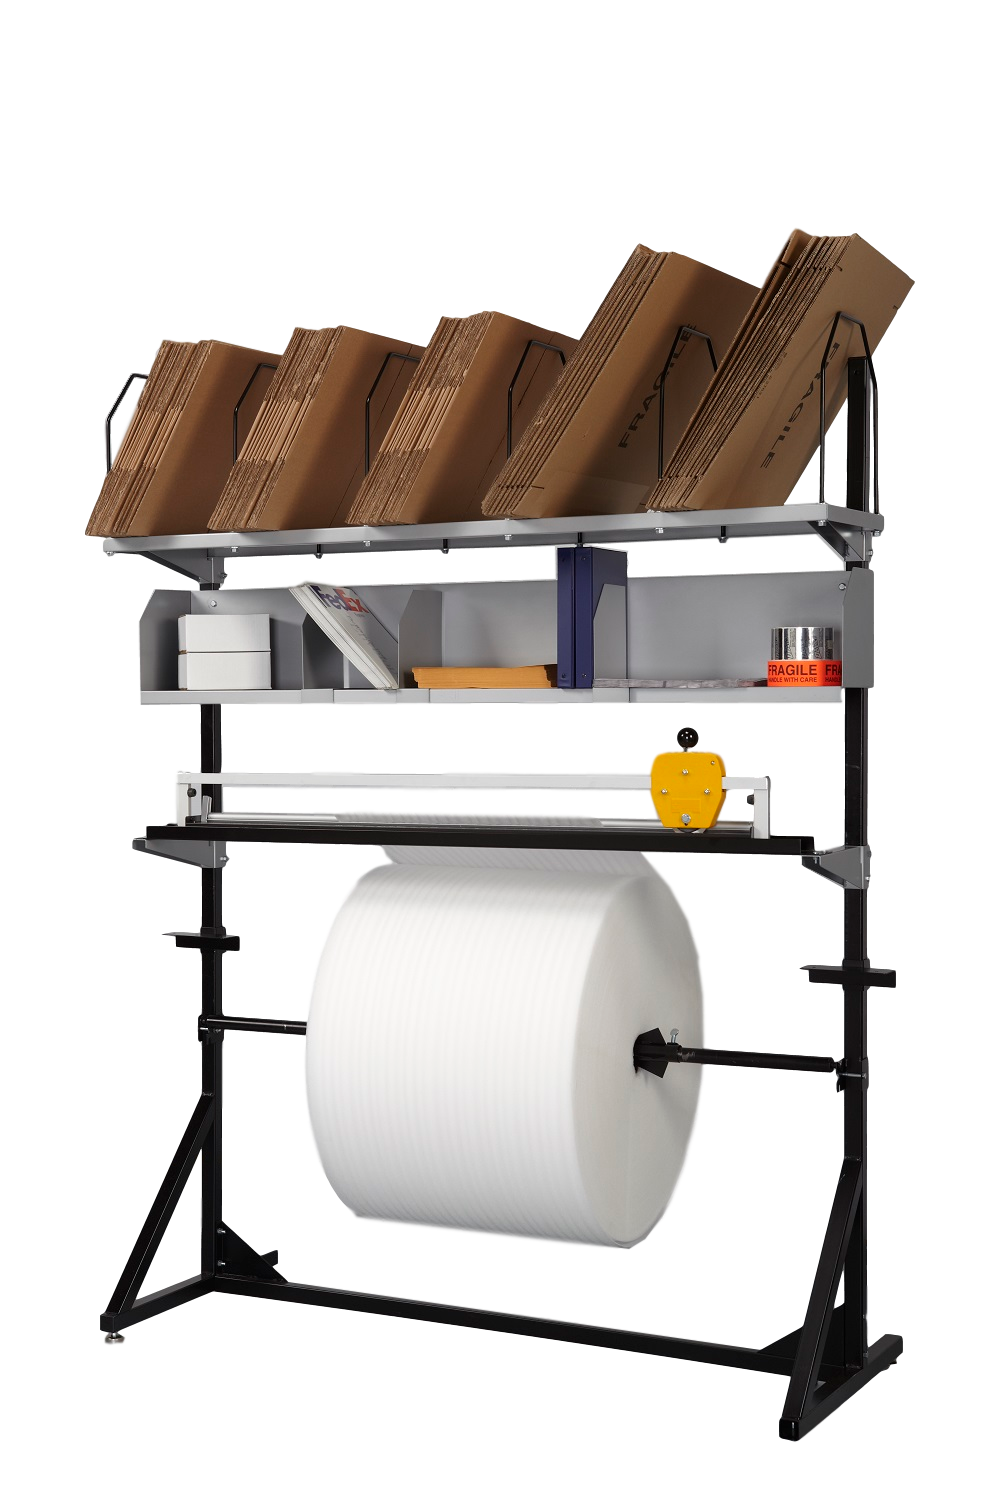 Customizable Cutters and Roll Stands